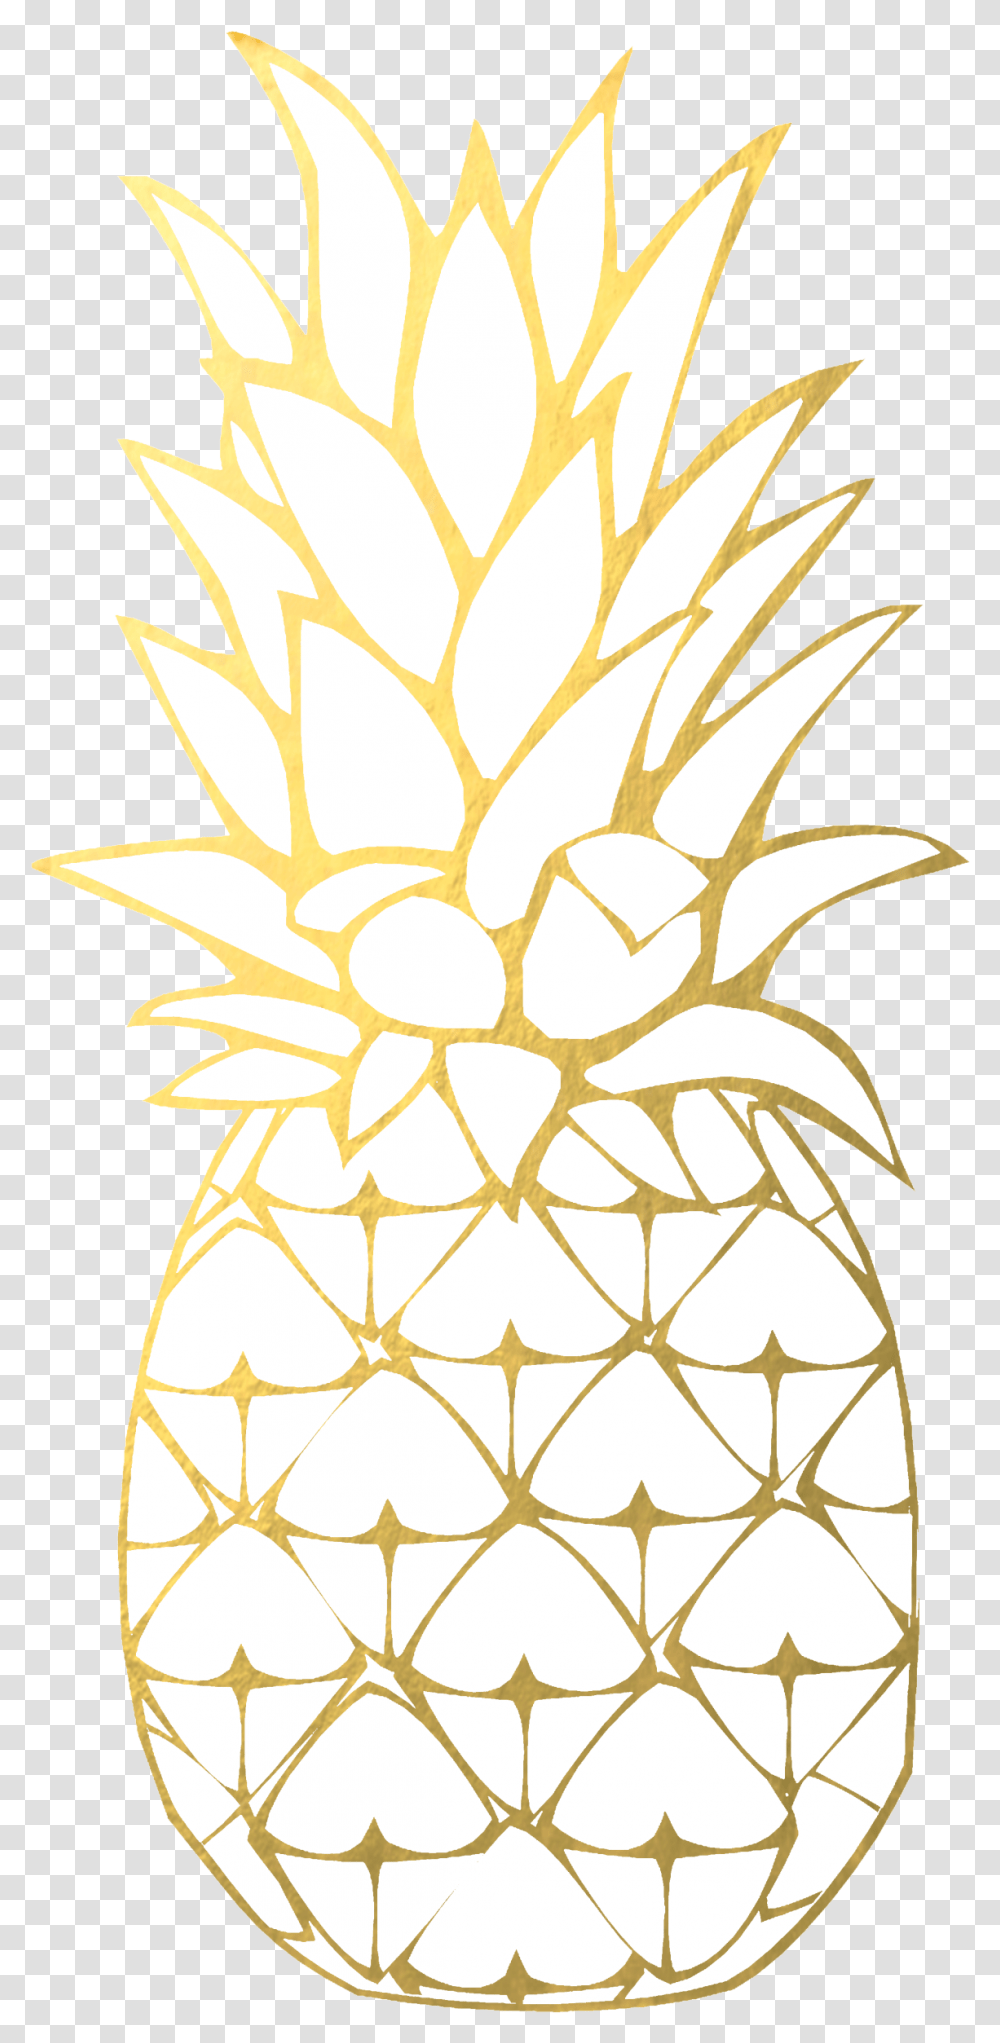 Pineapple Clipart Gold Pineapple Background Gold Pineapple, Fruit, Plant, Food Transparent Png